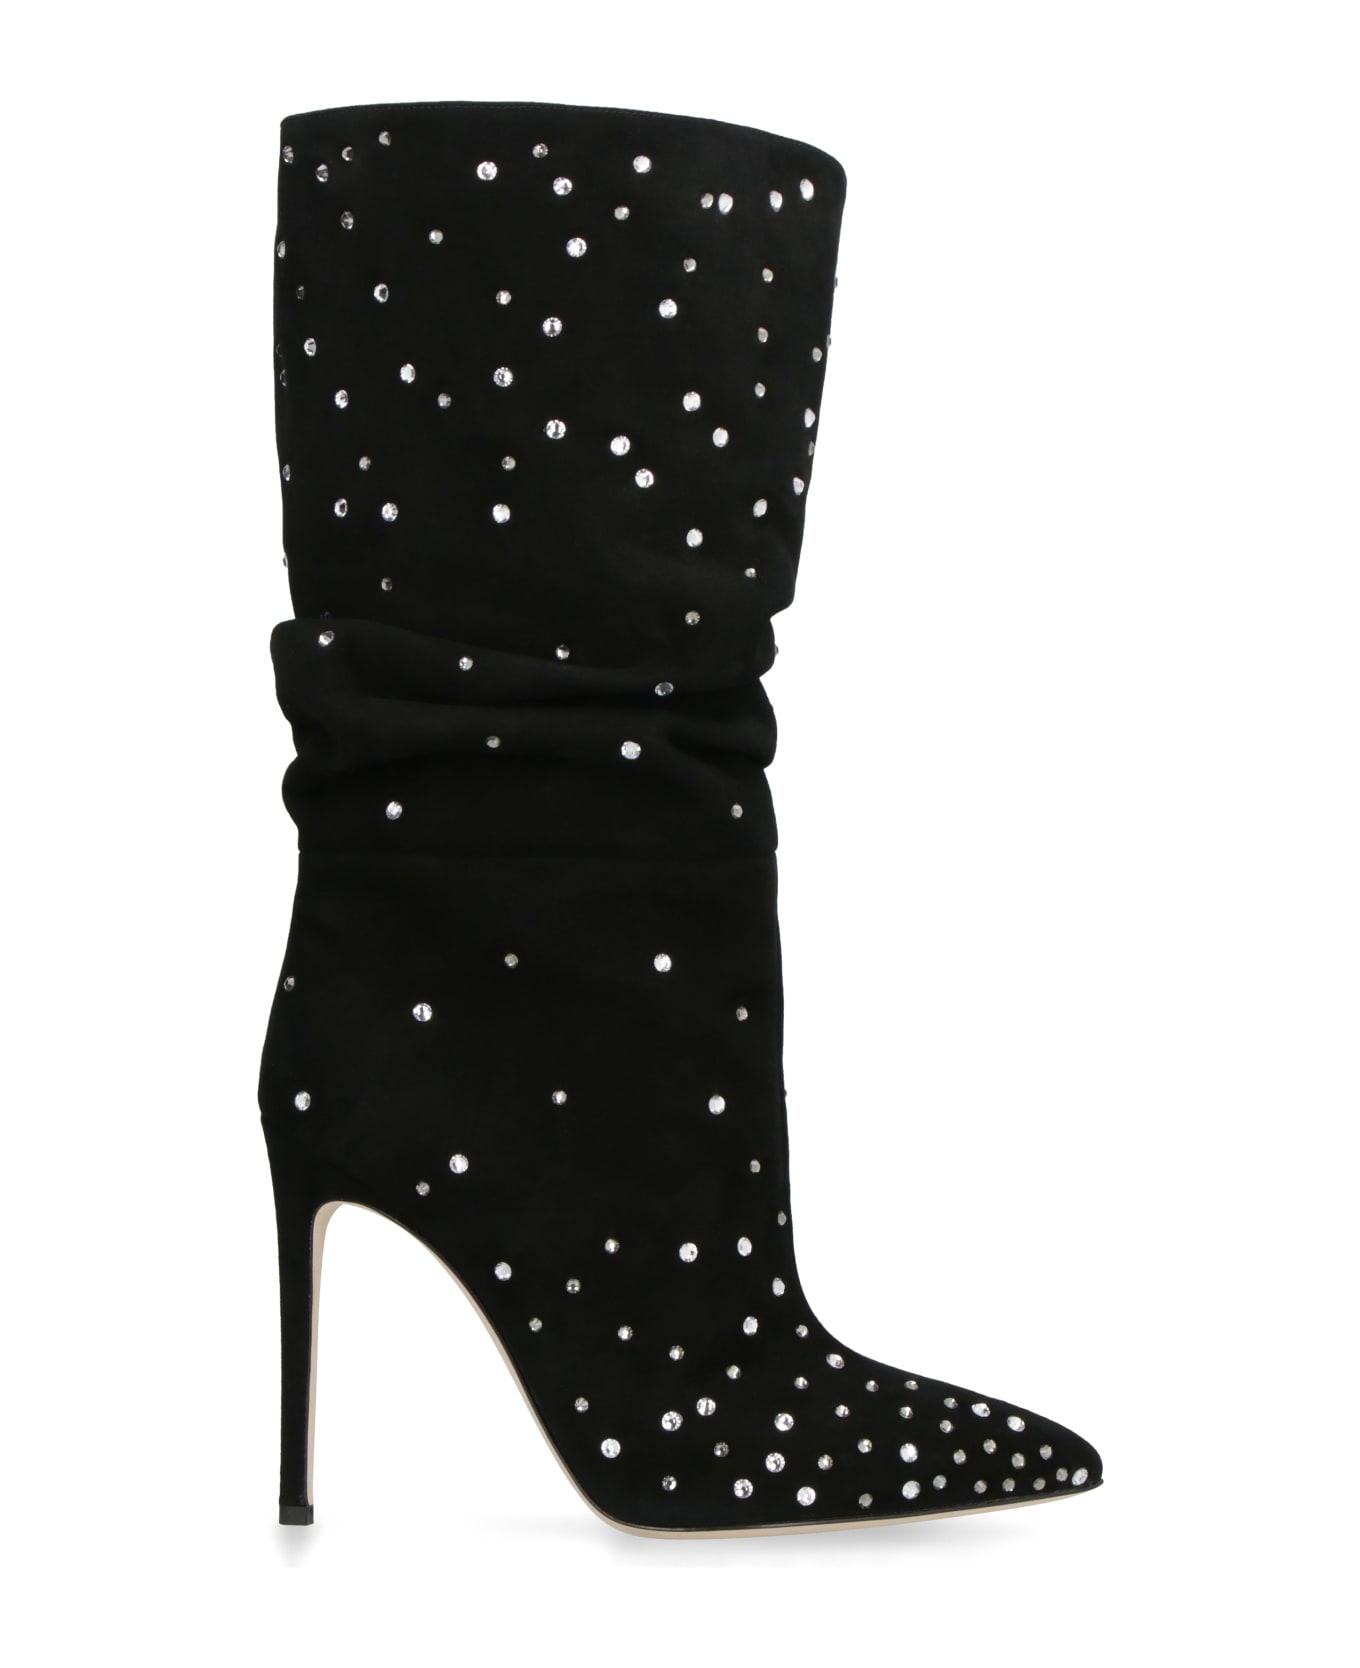 Paris Texas Holly Suede Knee High Boots | italist